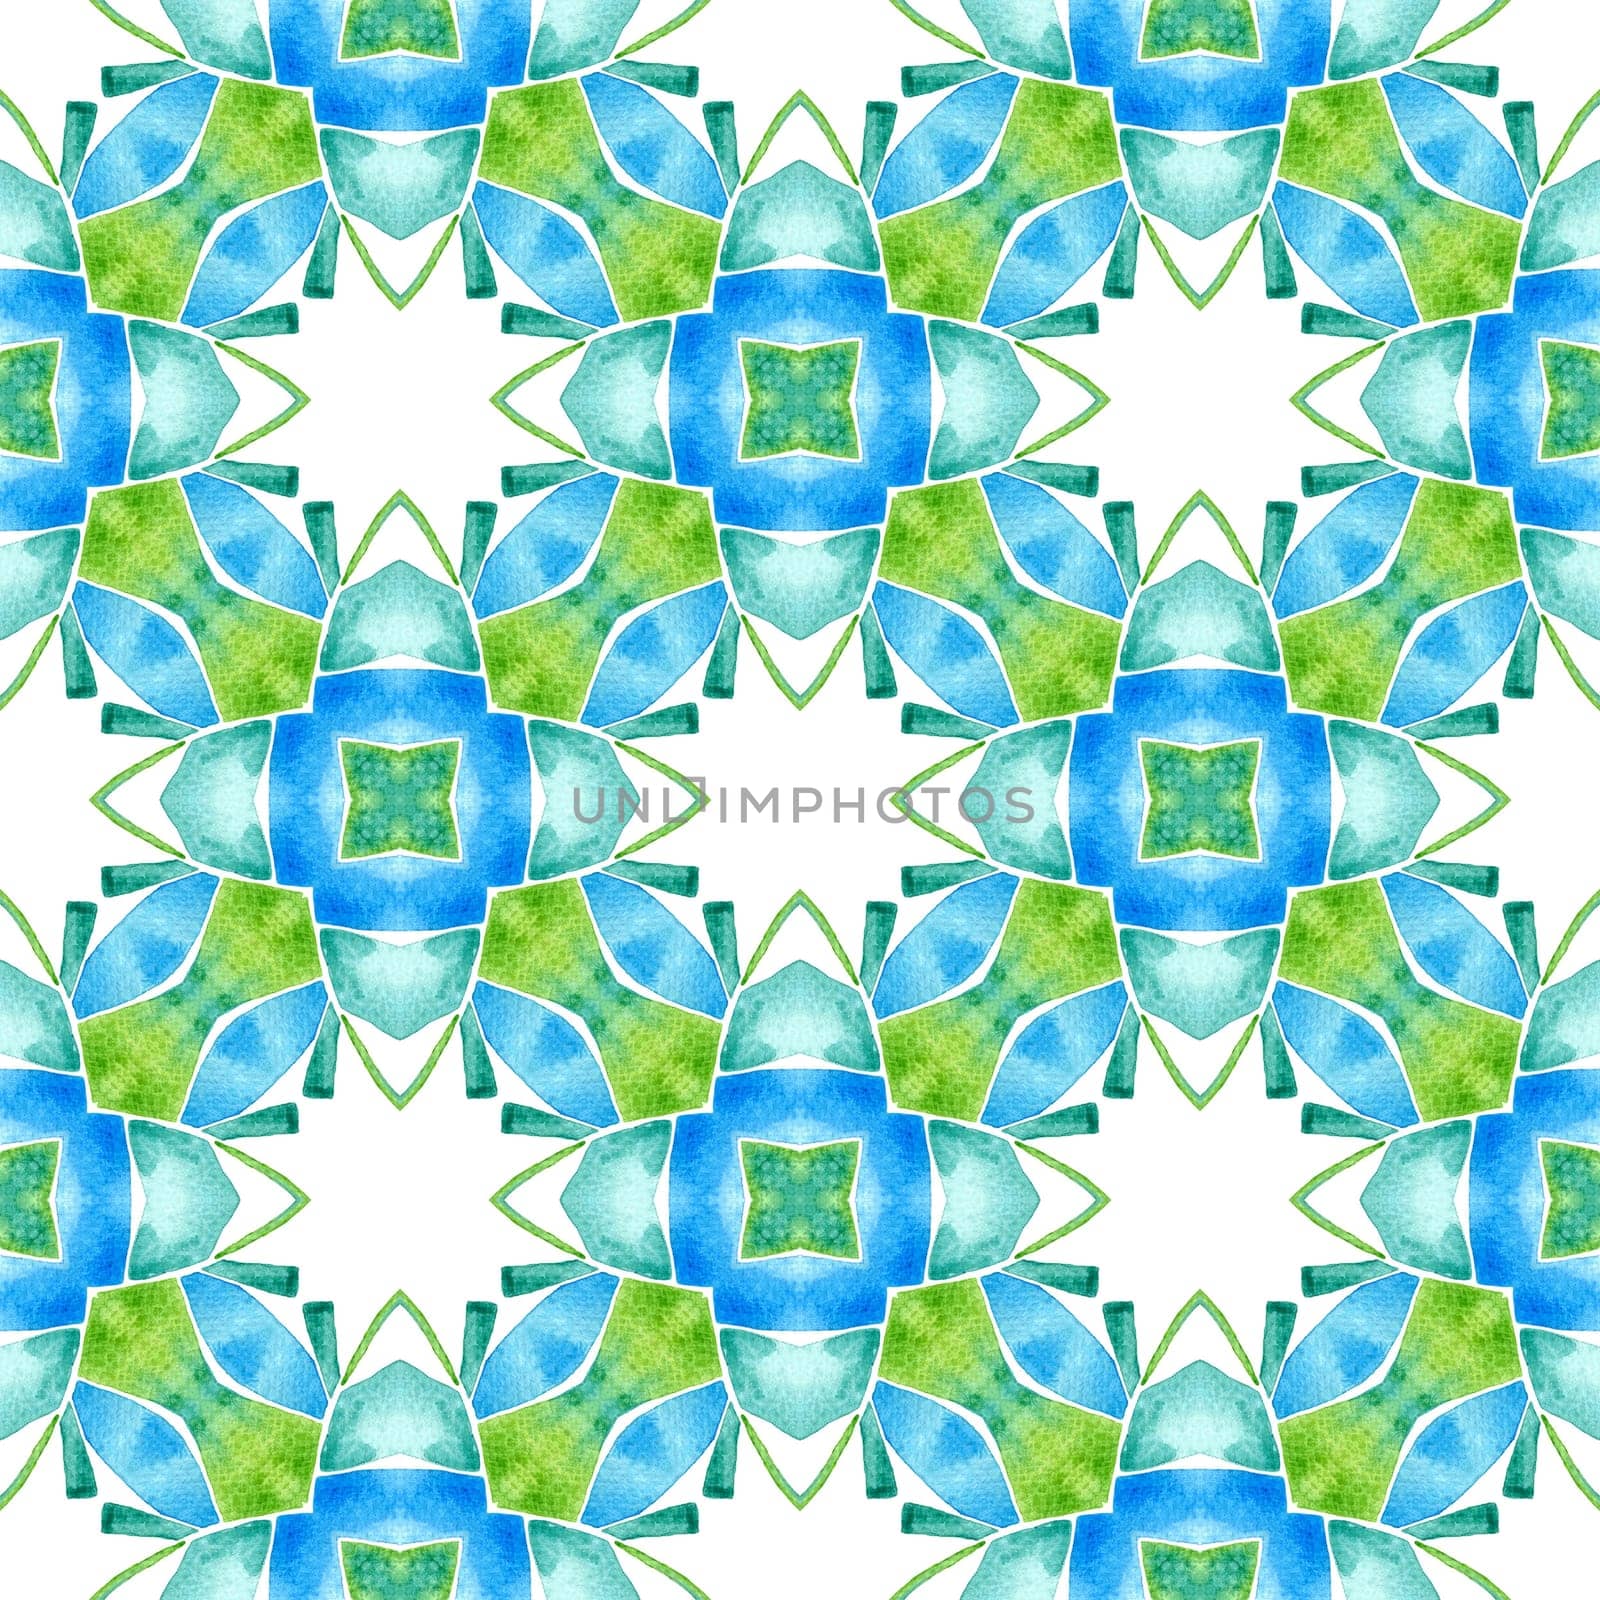 Watercolor ikat repeating tile border. Green artistic boho chic summer design. Textile ready sightly print, swimwear fabric, wallpaper, wrapping. Ikat repeating swimwear design.